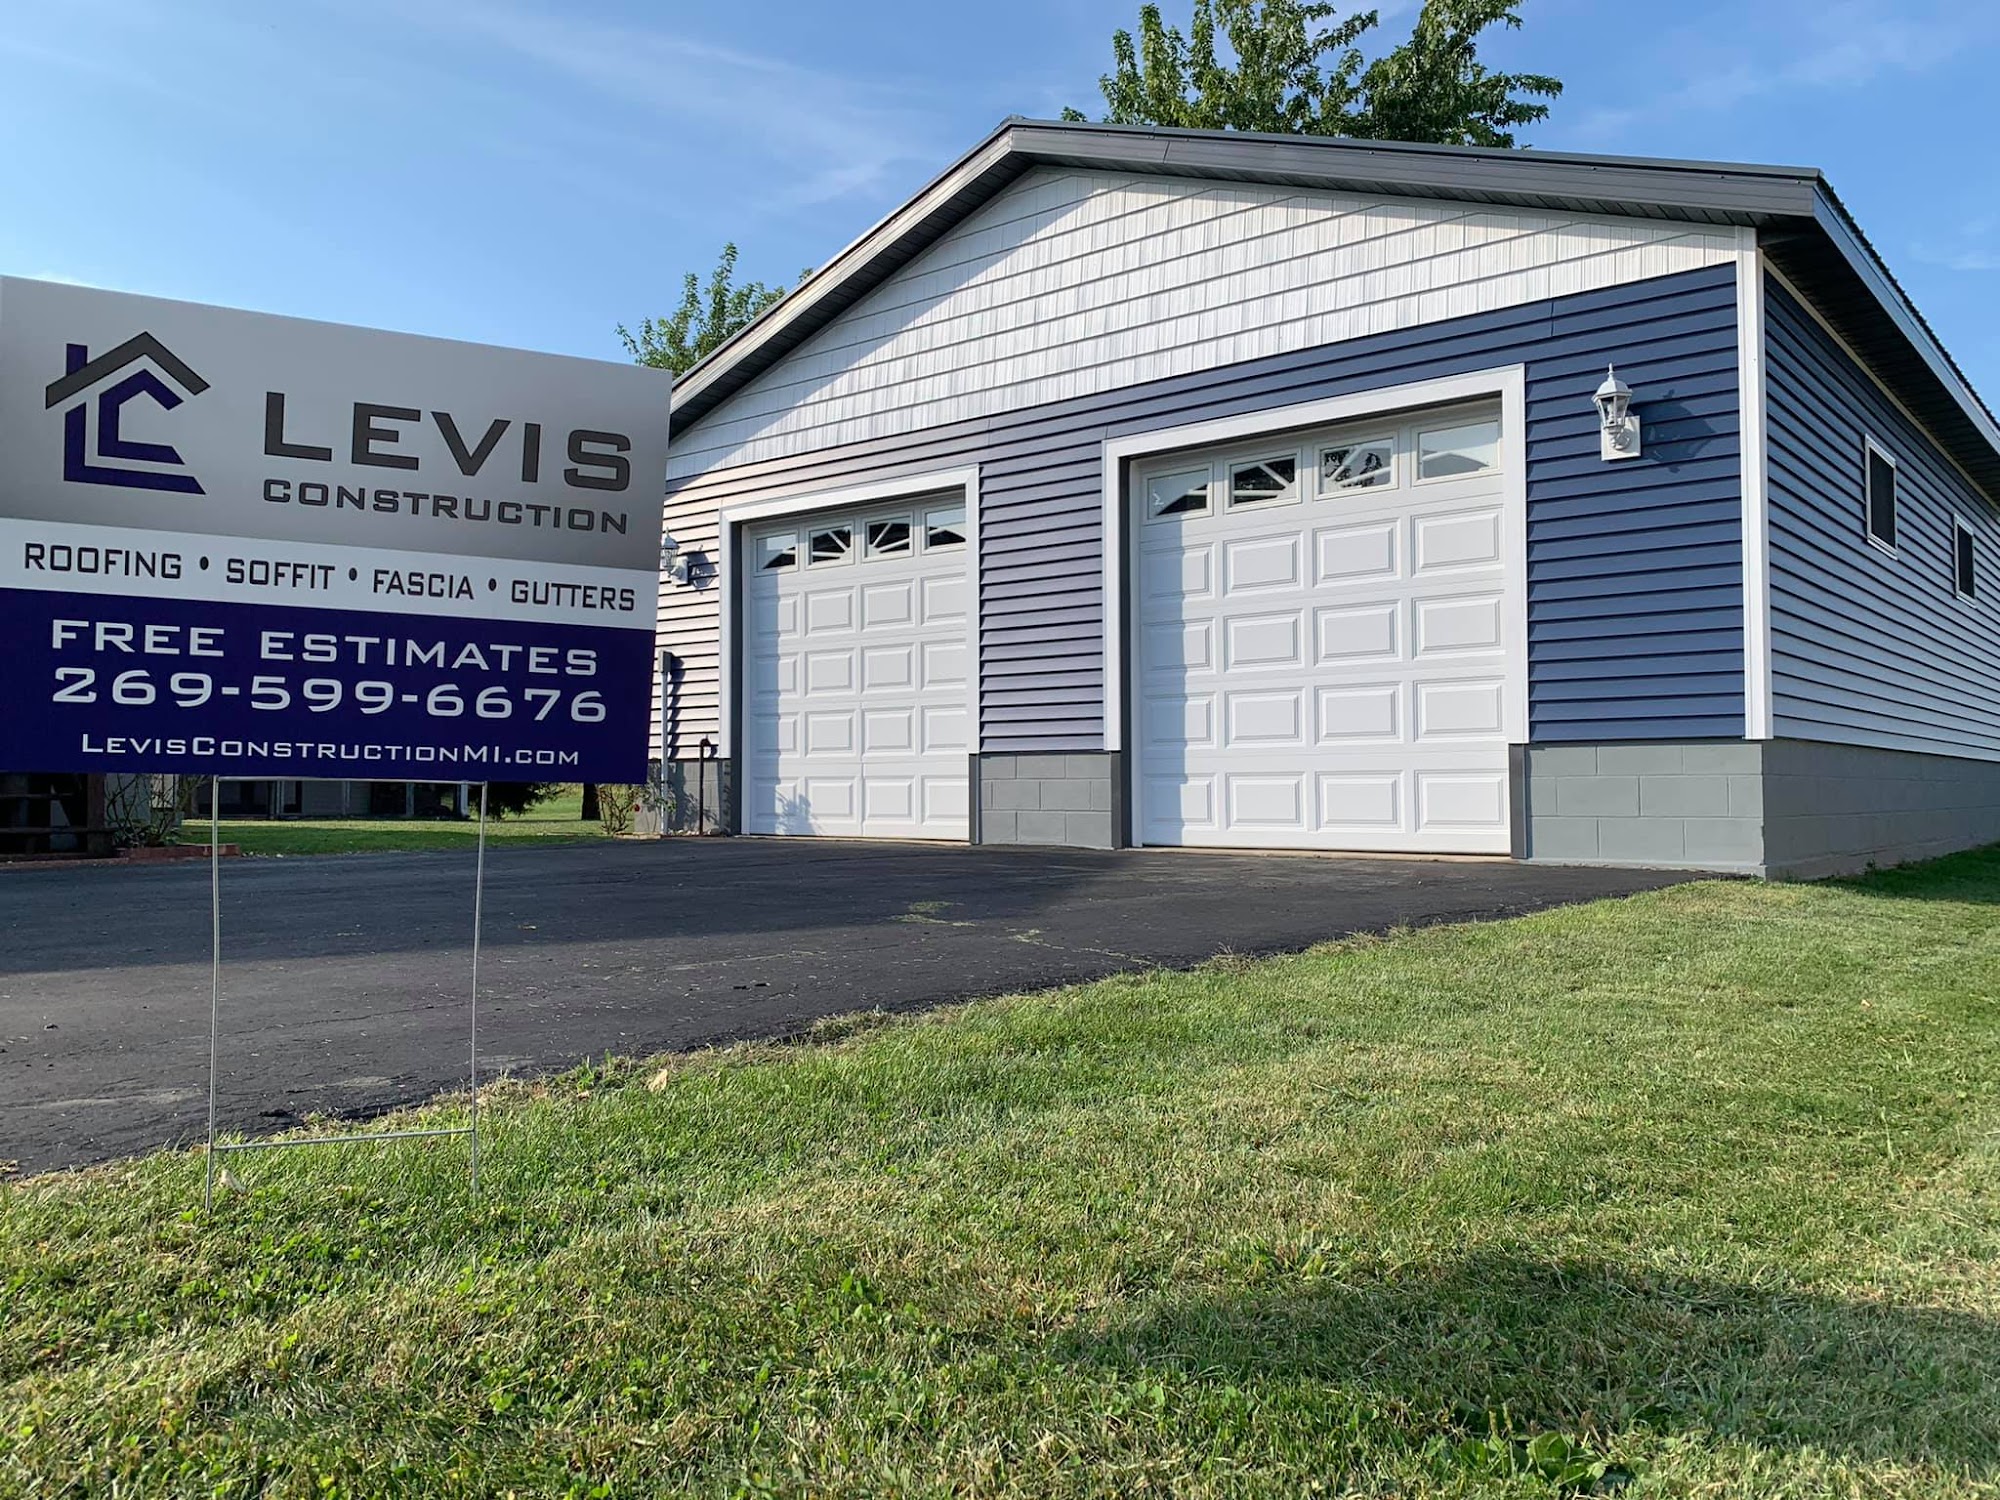 Levis Roofing & Construction